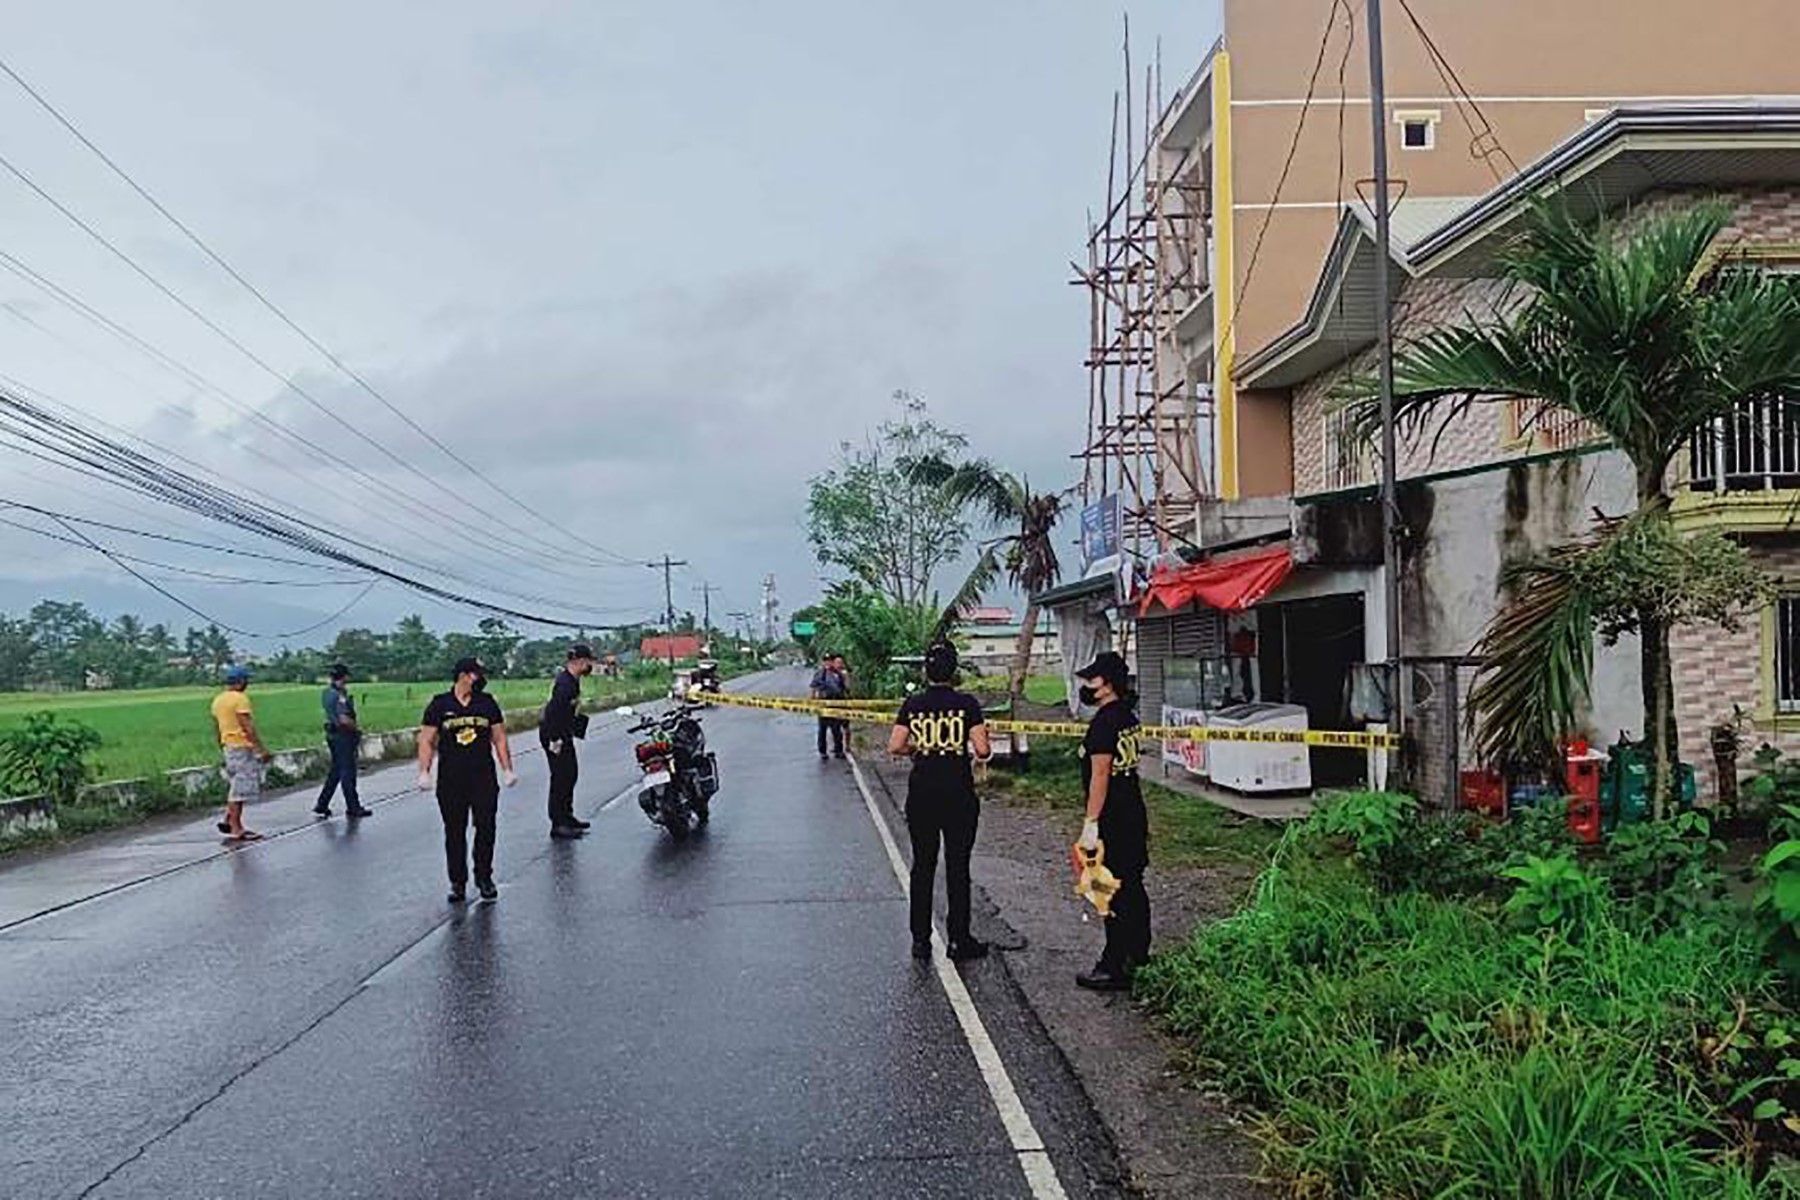 Radio broadcaster killed in the Philippines: police